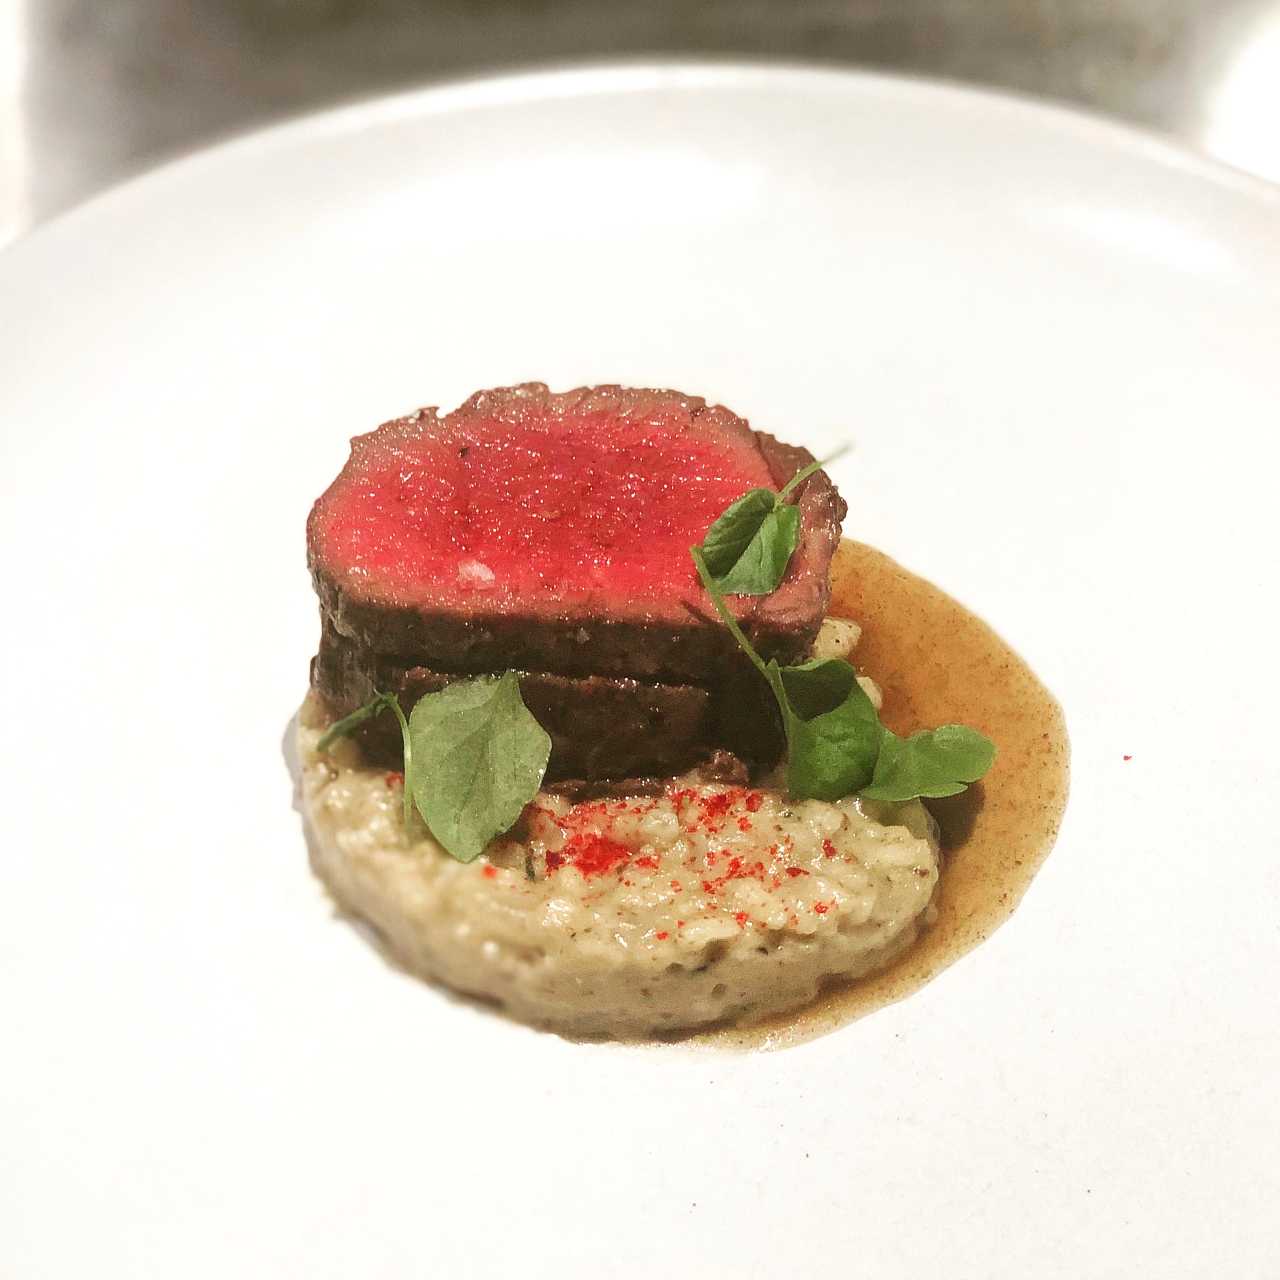 Venison rack with mushroom risotto